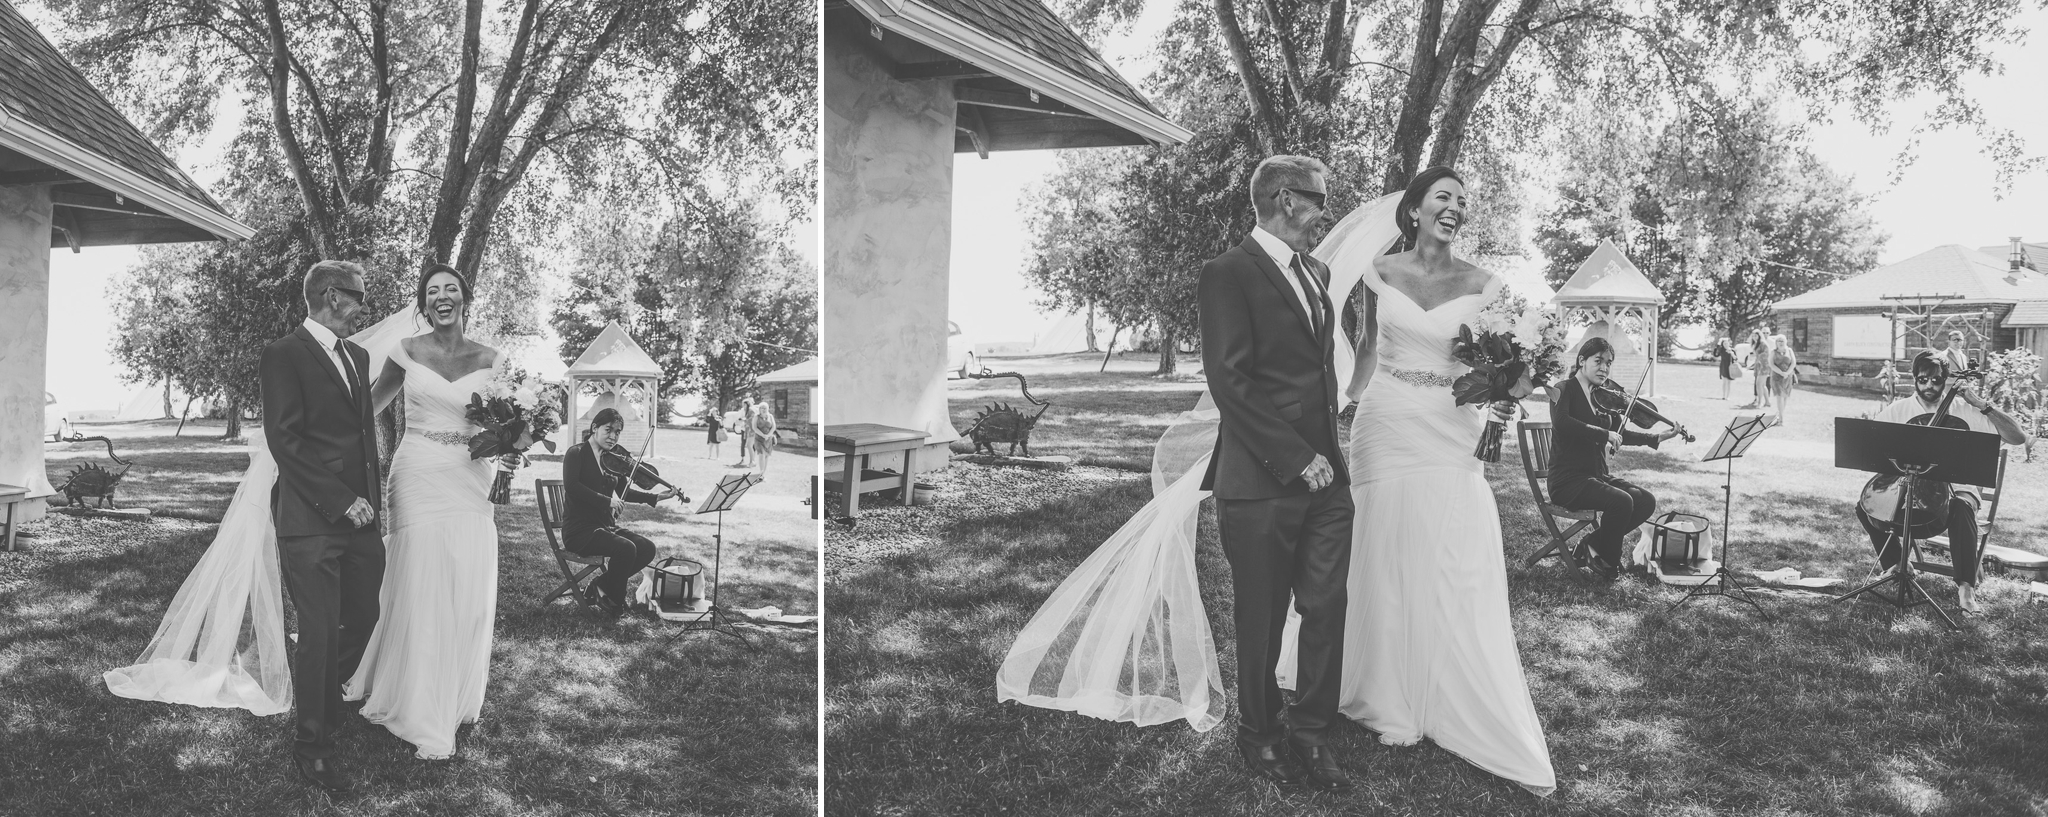 farm wedding, country wedding, toronto, port hope, port hope wedding, cold springs wedding, bride, groom, wedding, intimate wedding, small wedding, black and white, window light, ceremony, outdoor ceremony, bride and father, father daughter